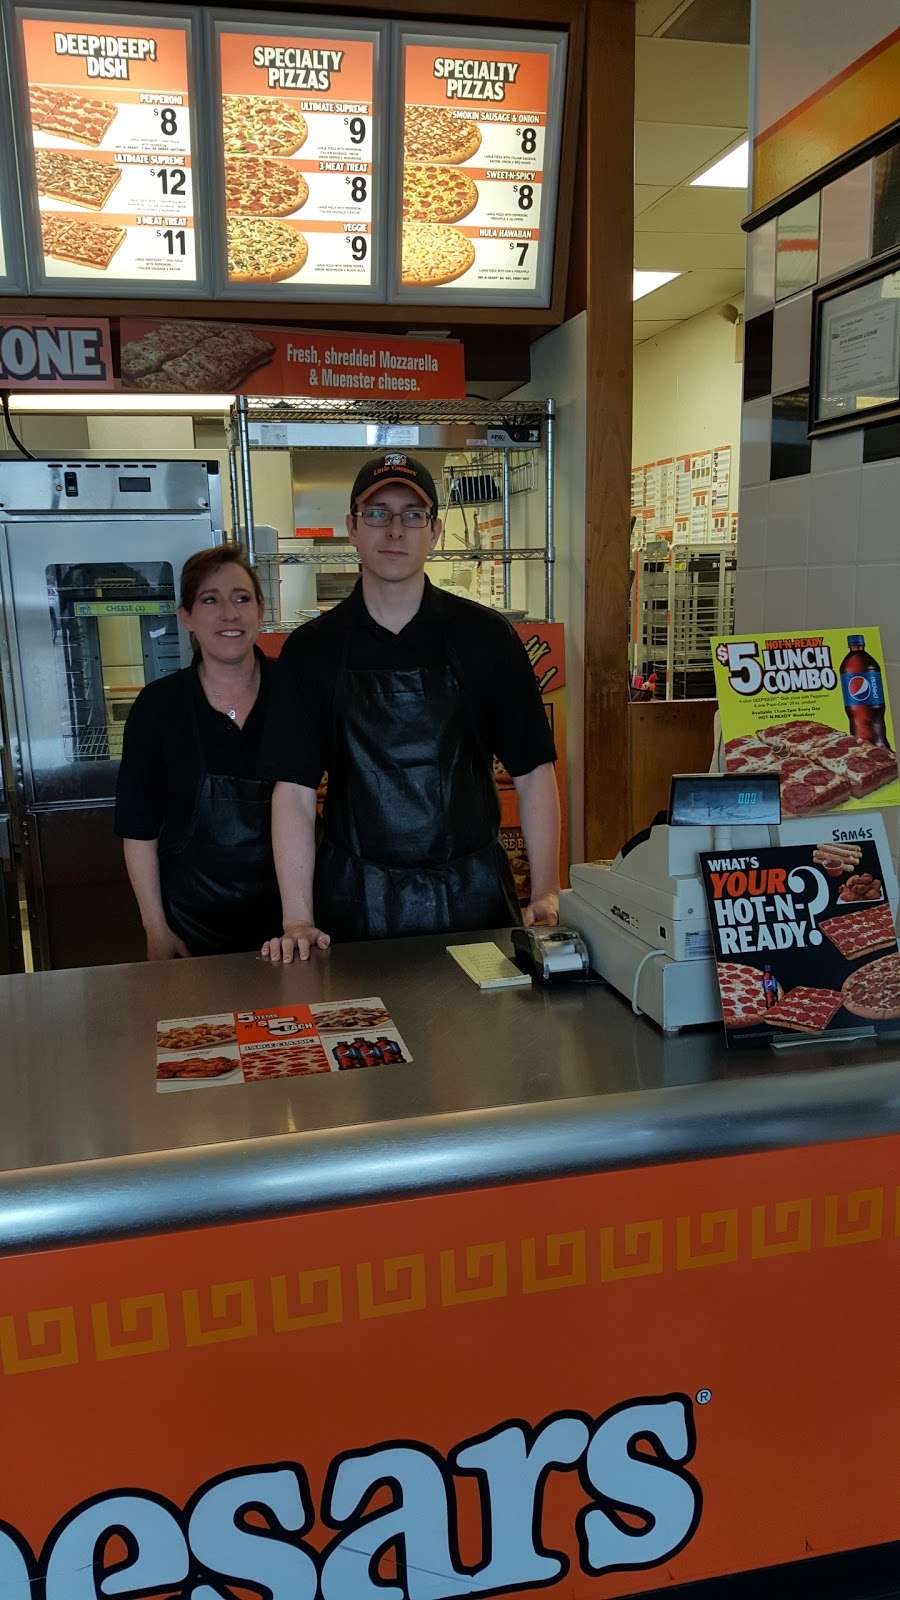 Little Caesars Pizza | 3106 Kirchoff Rd, Rolling Meadows, IL 60008, USA | Phone: (847) 255-6688